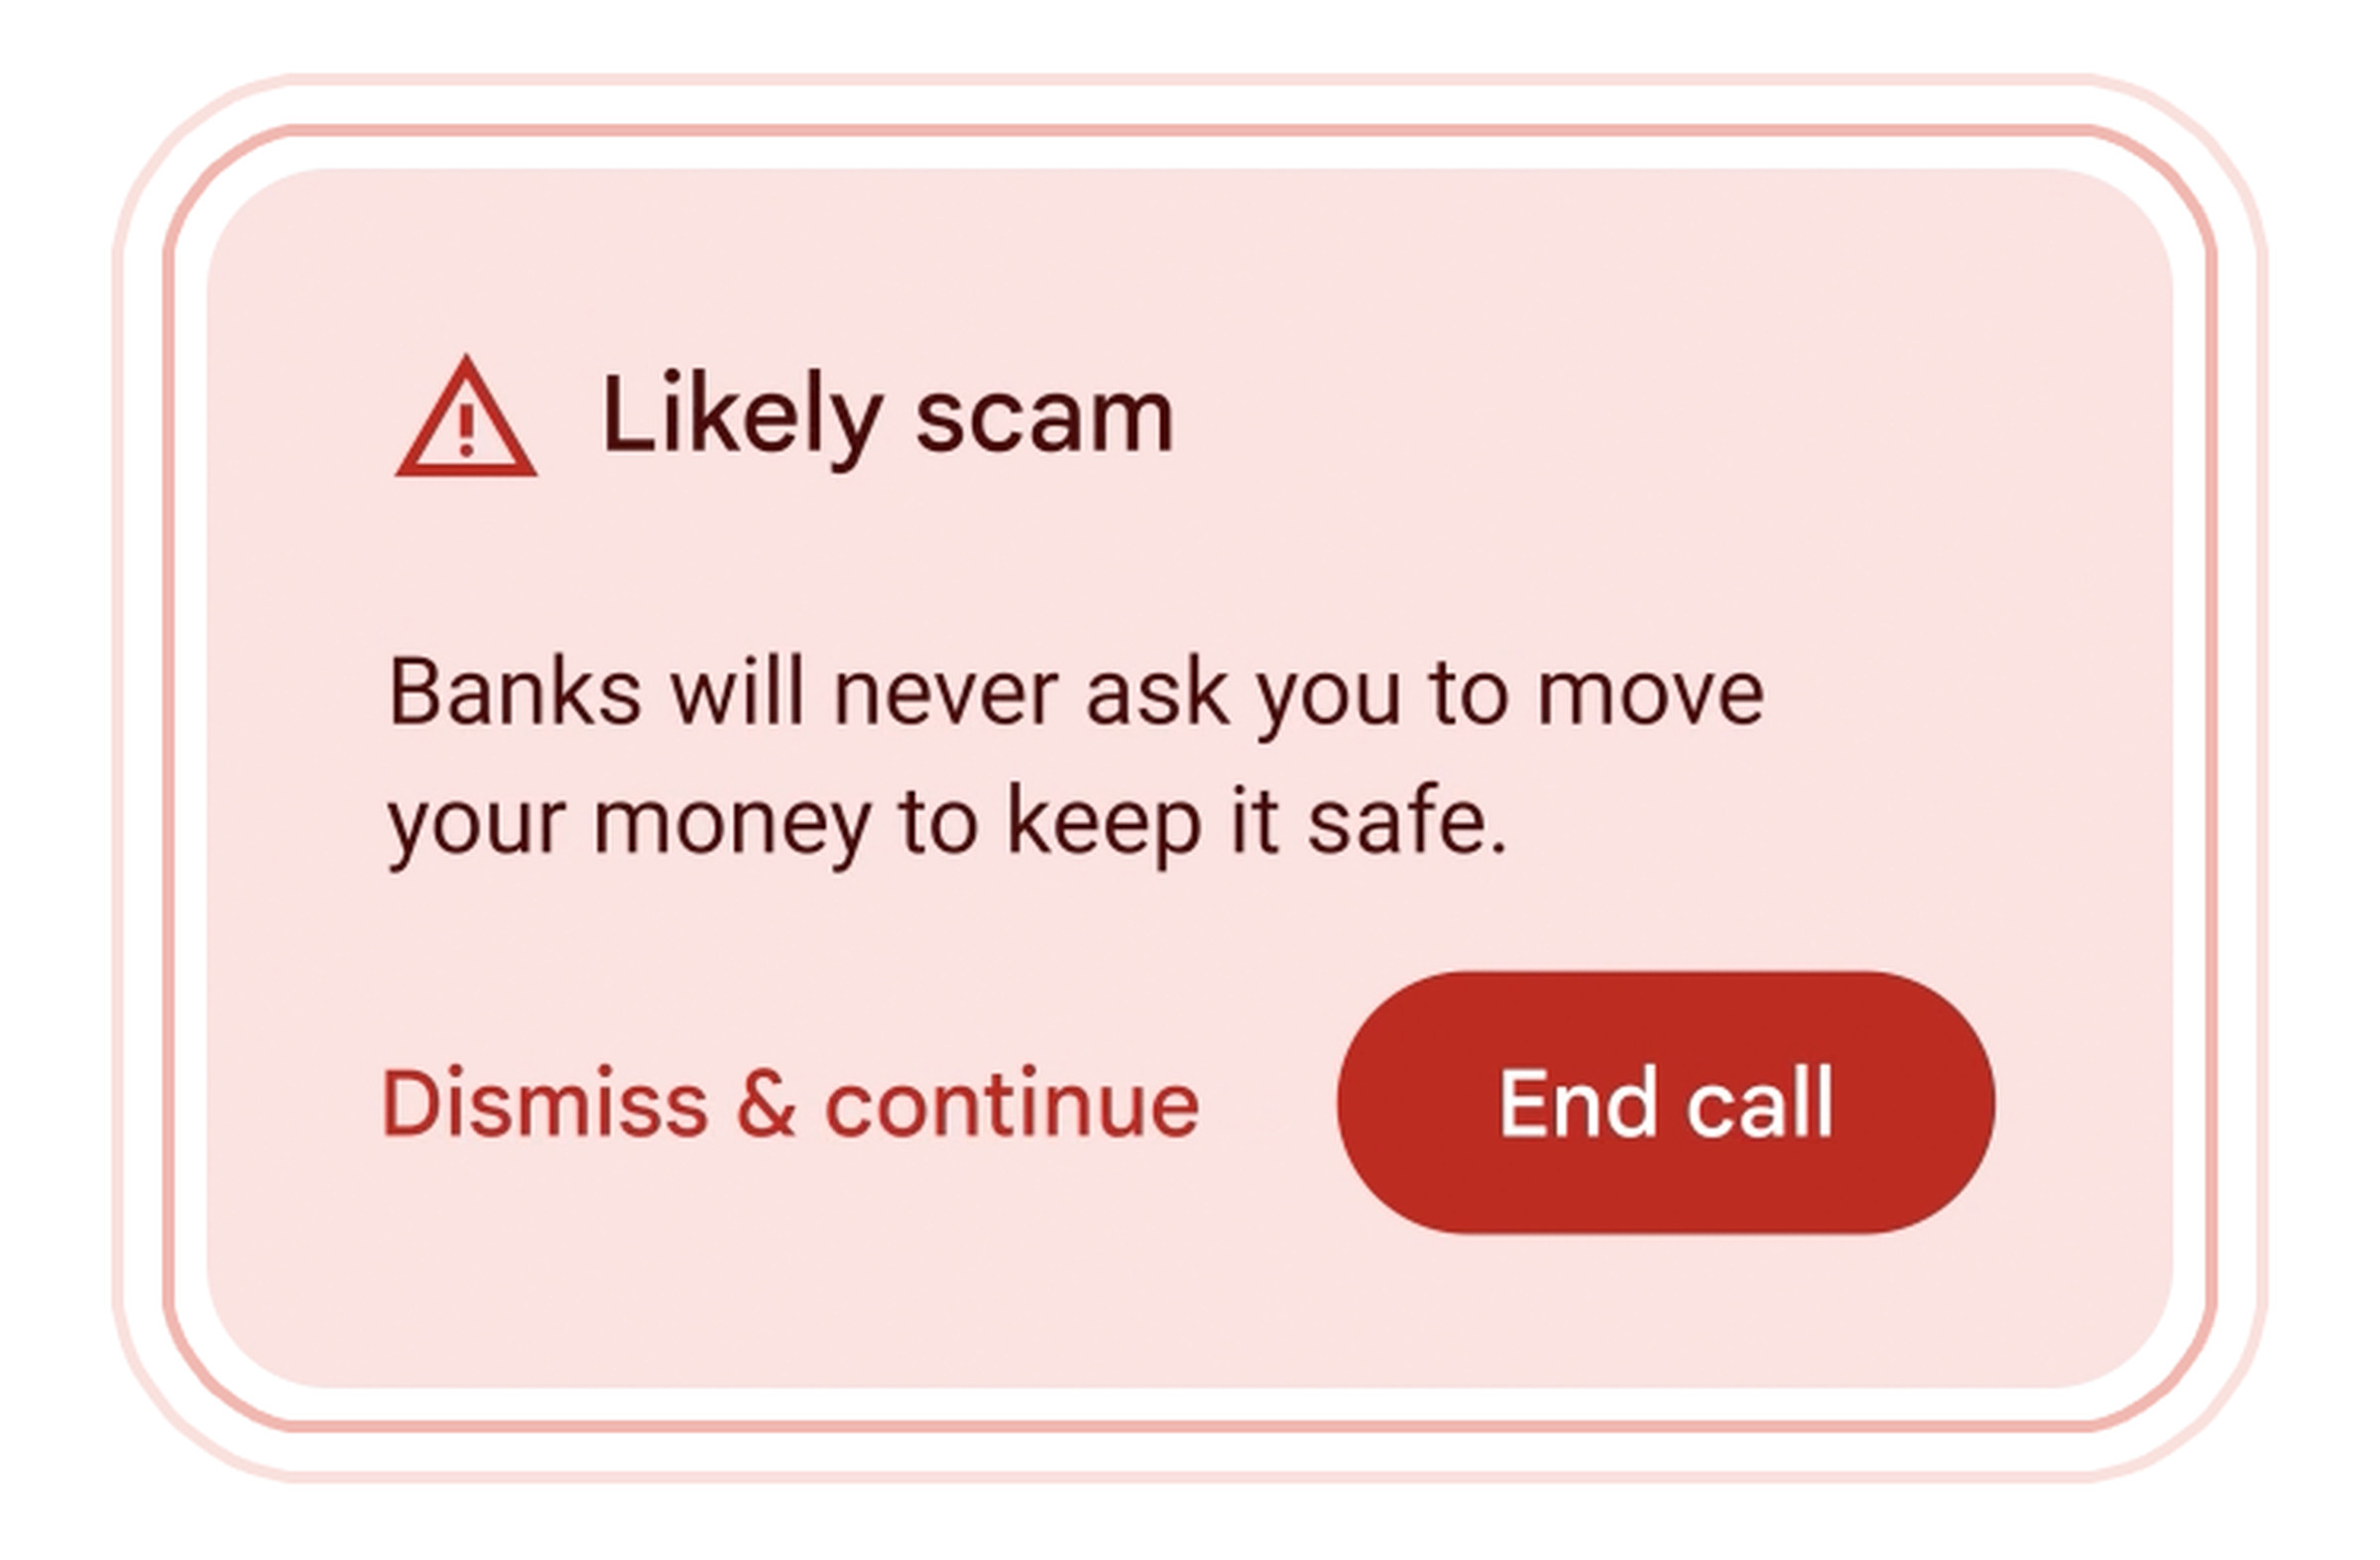 An Android notification warning users of suspected scamming activities during calls.